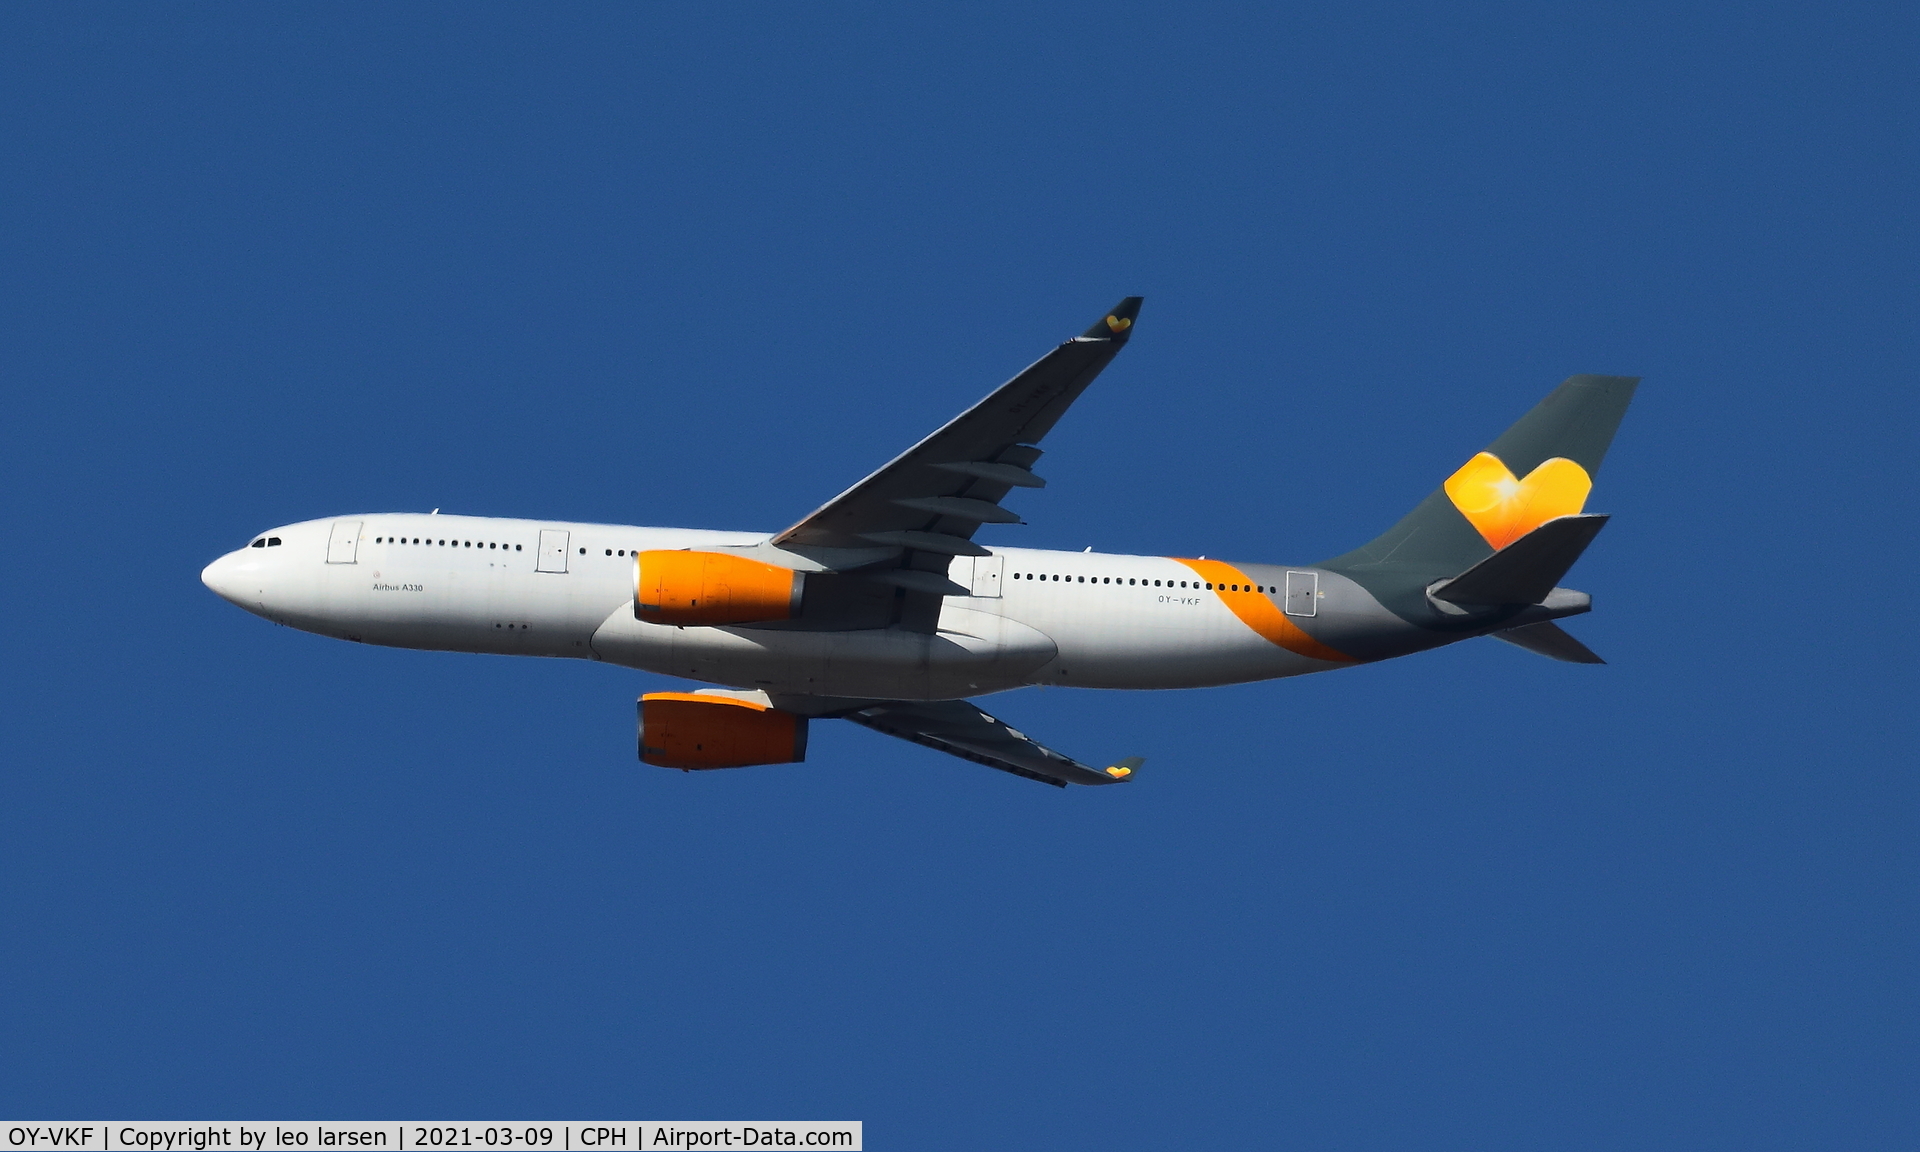 OY-VKF, 1999 Airbus A330-243 C/N 309, Copenhagen 9.3.2021 on its way to CHR Chateauroux for painting